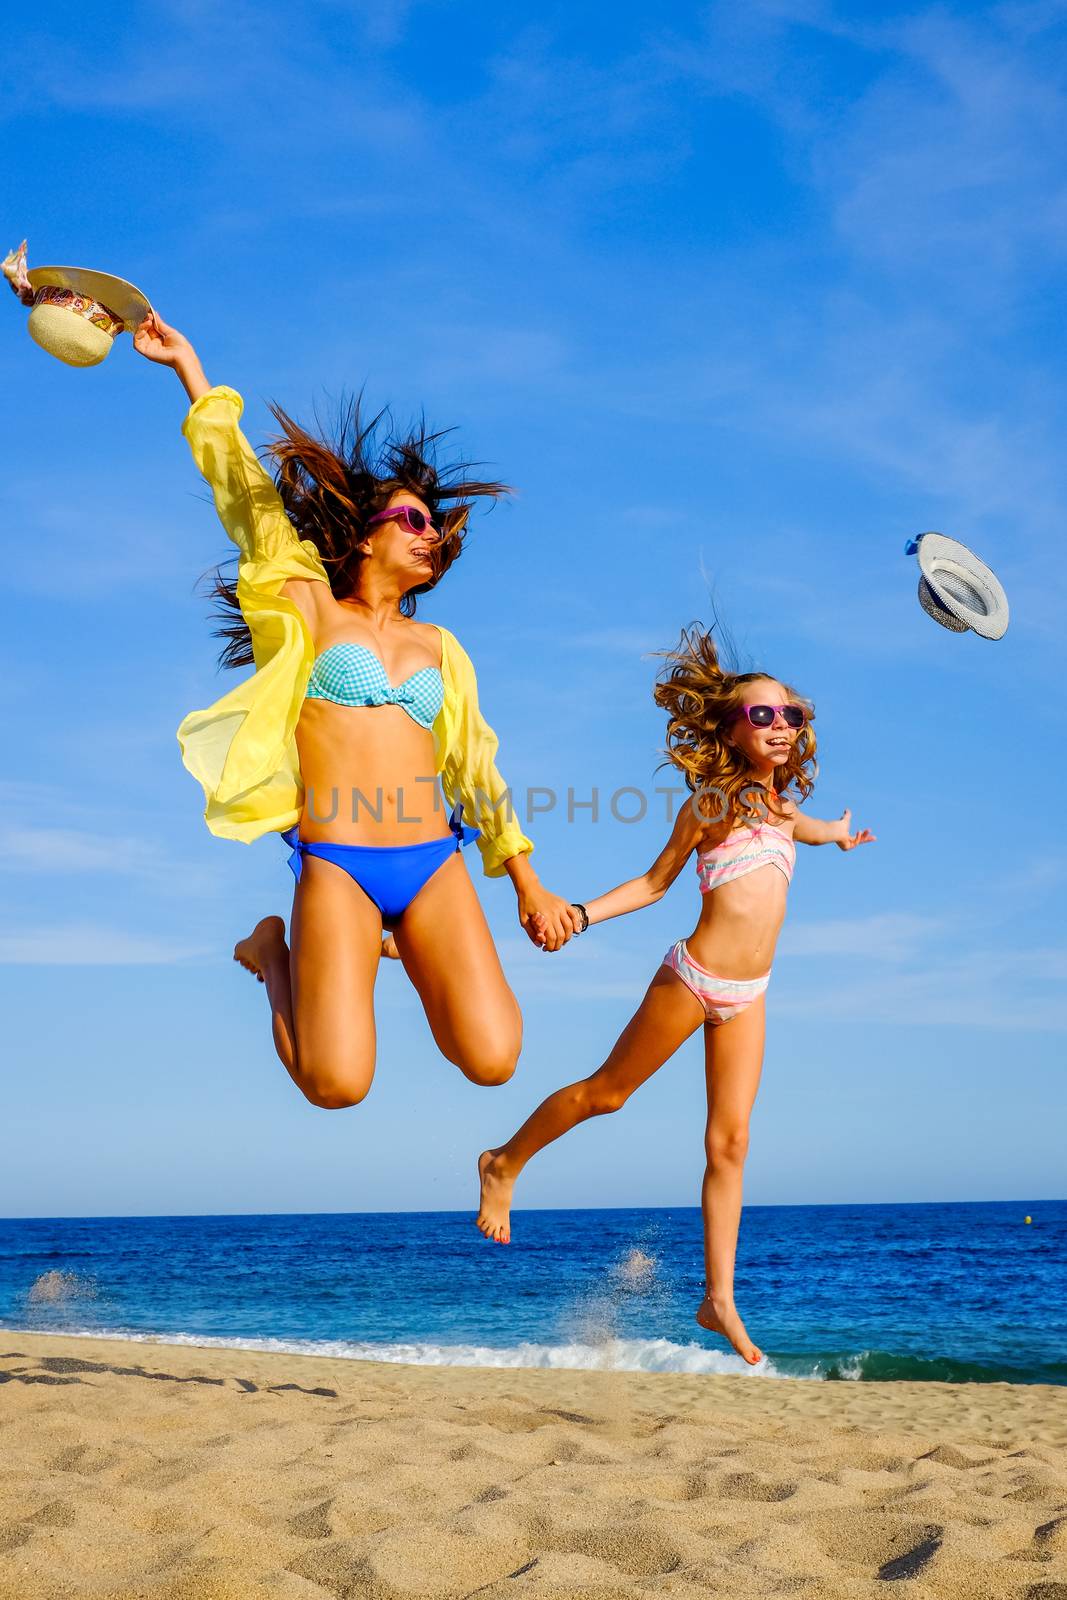 Young girls in swimwear jumping on beach. by karelnoppe